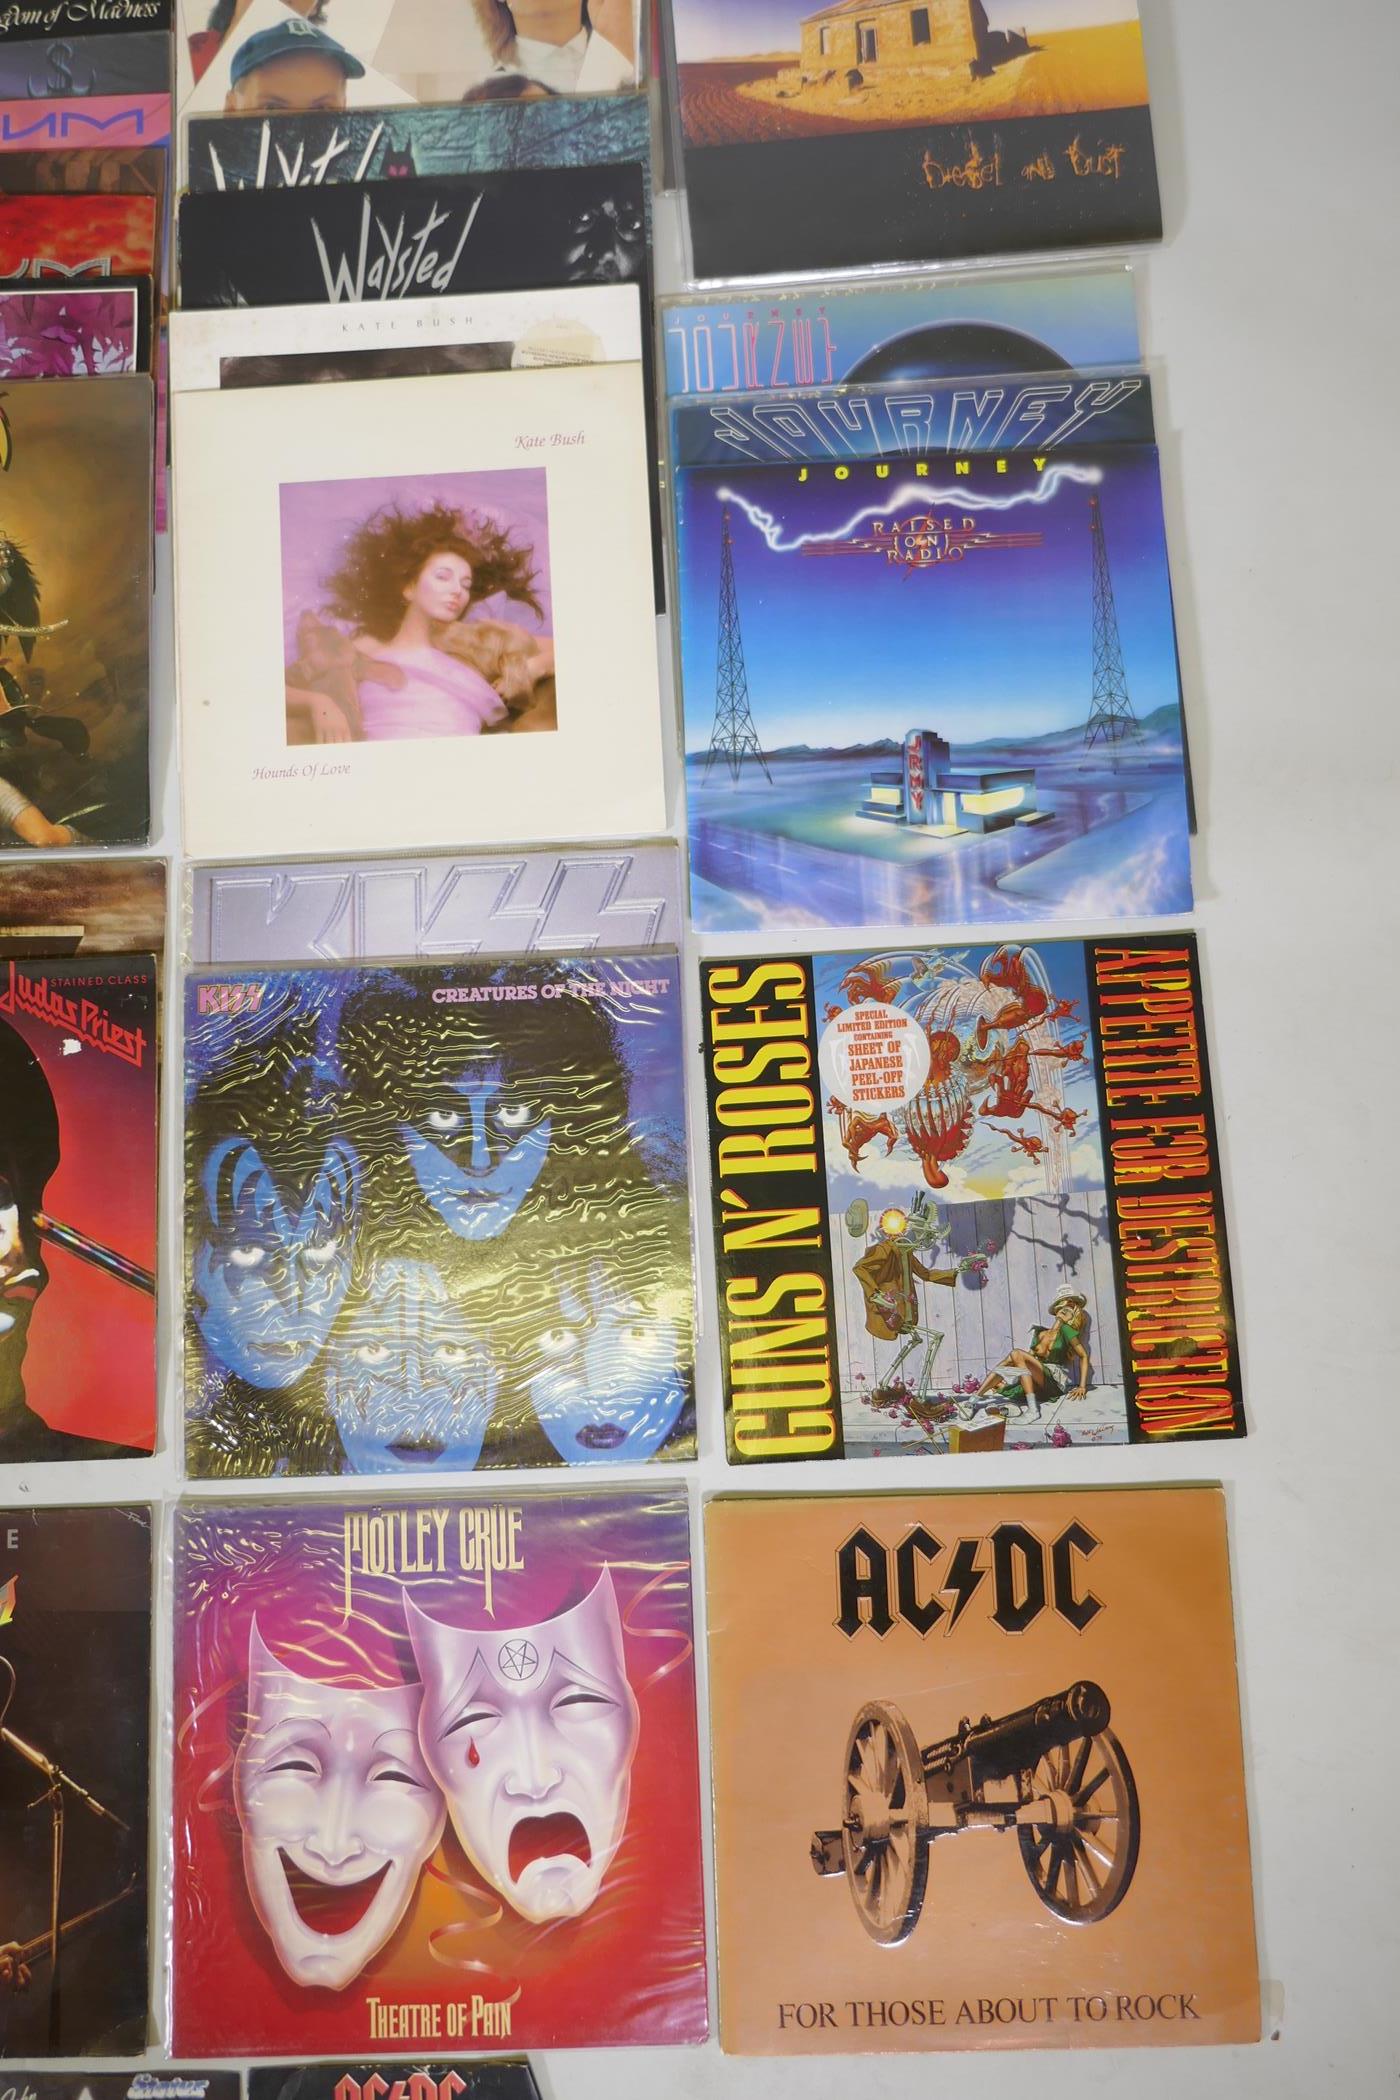 A quantity of 12" metal and rock vinyl LPs including Metallica, Meatloaf, Thin Lizzy, Motorhead, - Image 6 of 16